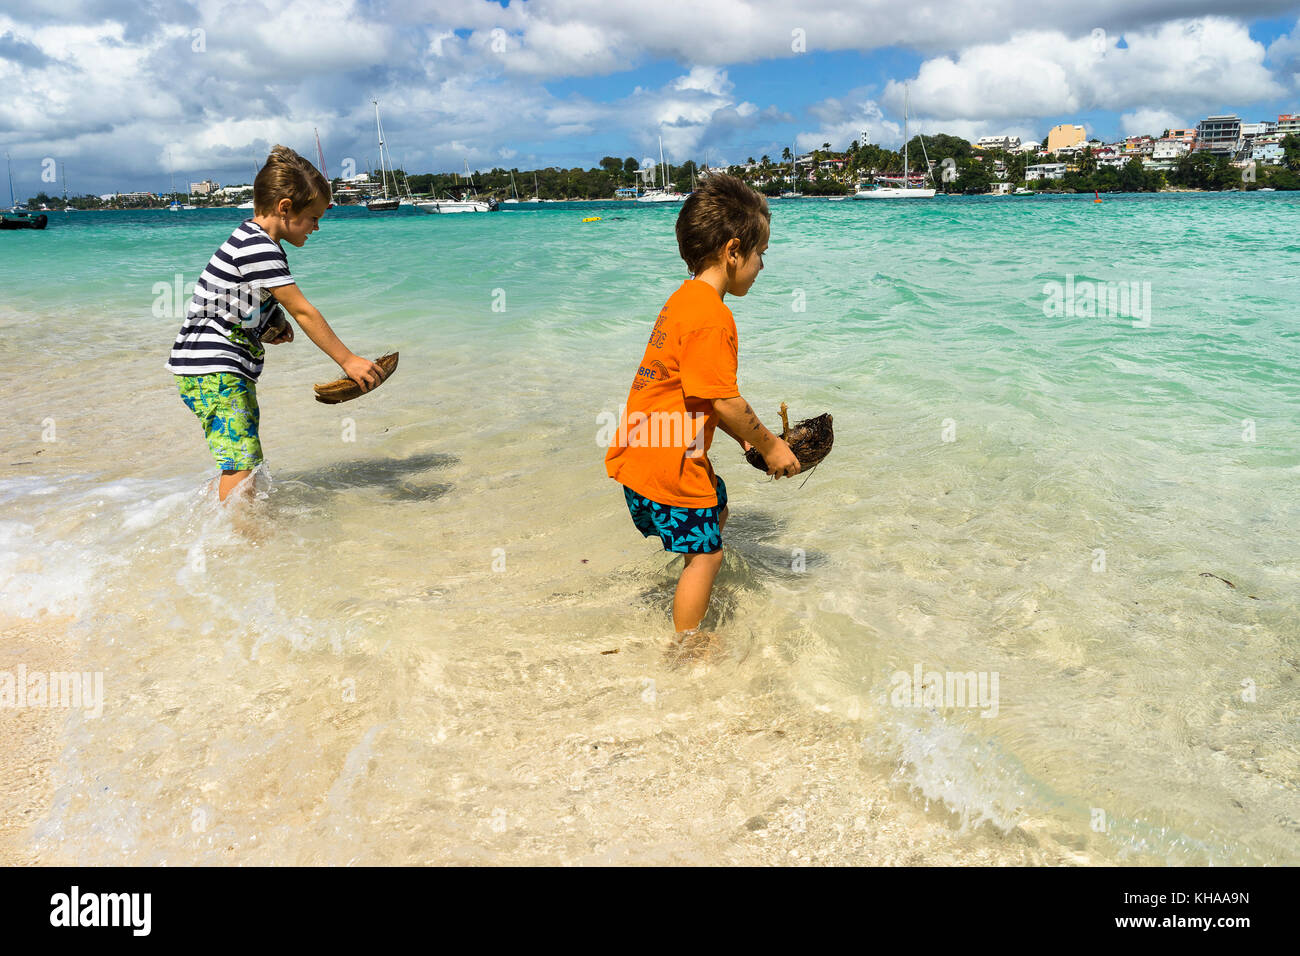 Two young boys, 5 and 7 years old, playing with small boat in coco ont he beach, Gosier island, Guadeloupe, France Stock Photo